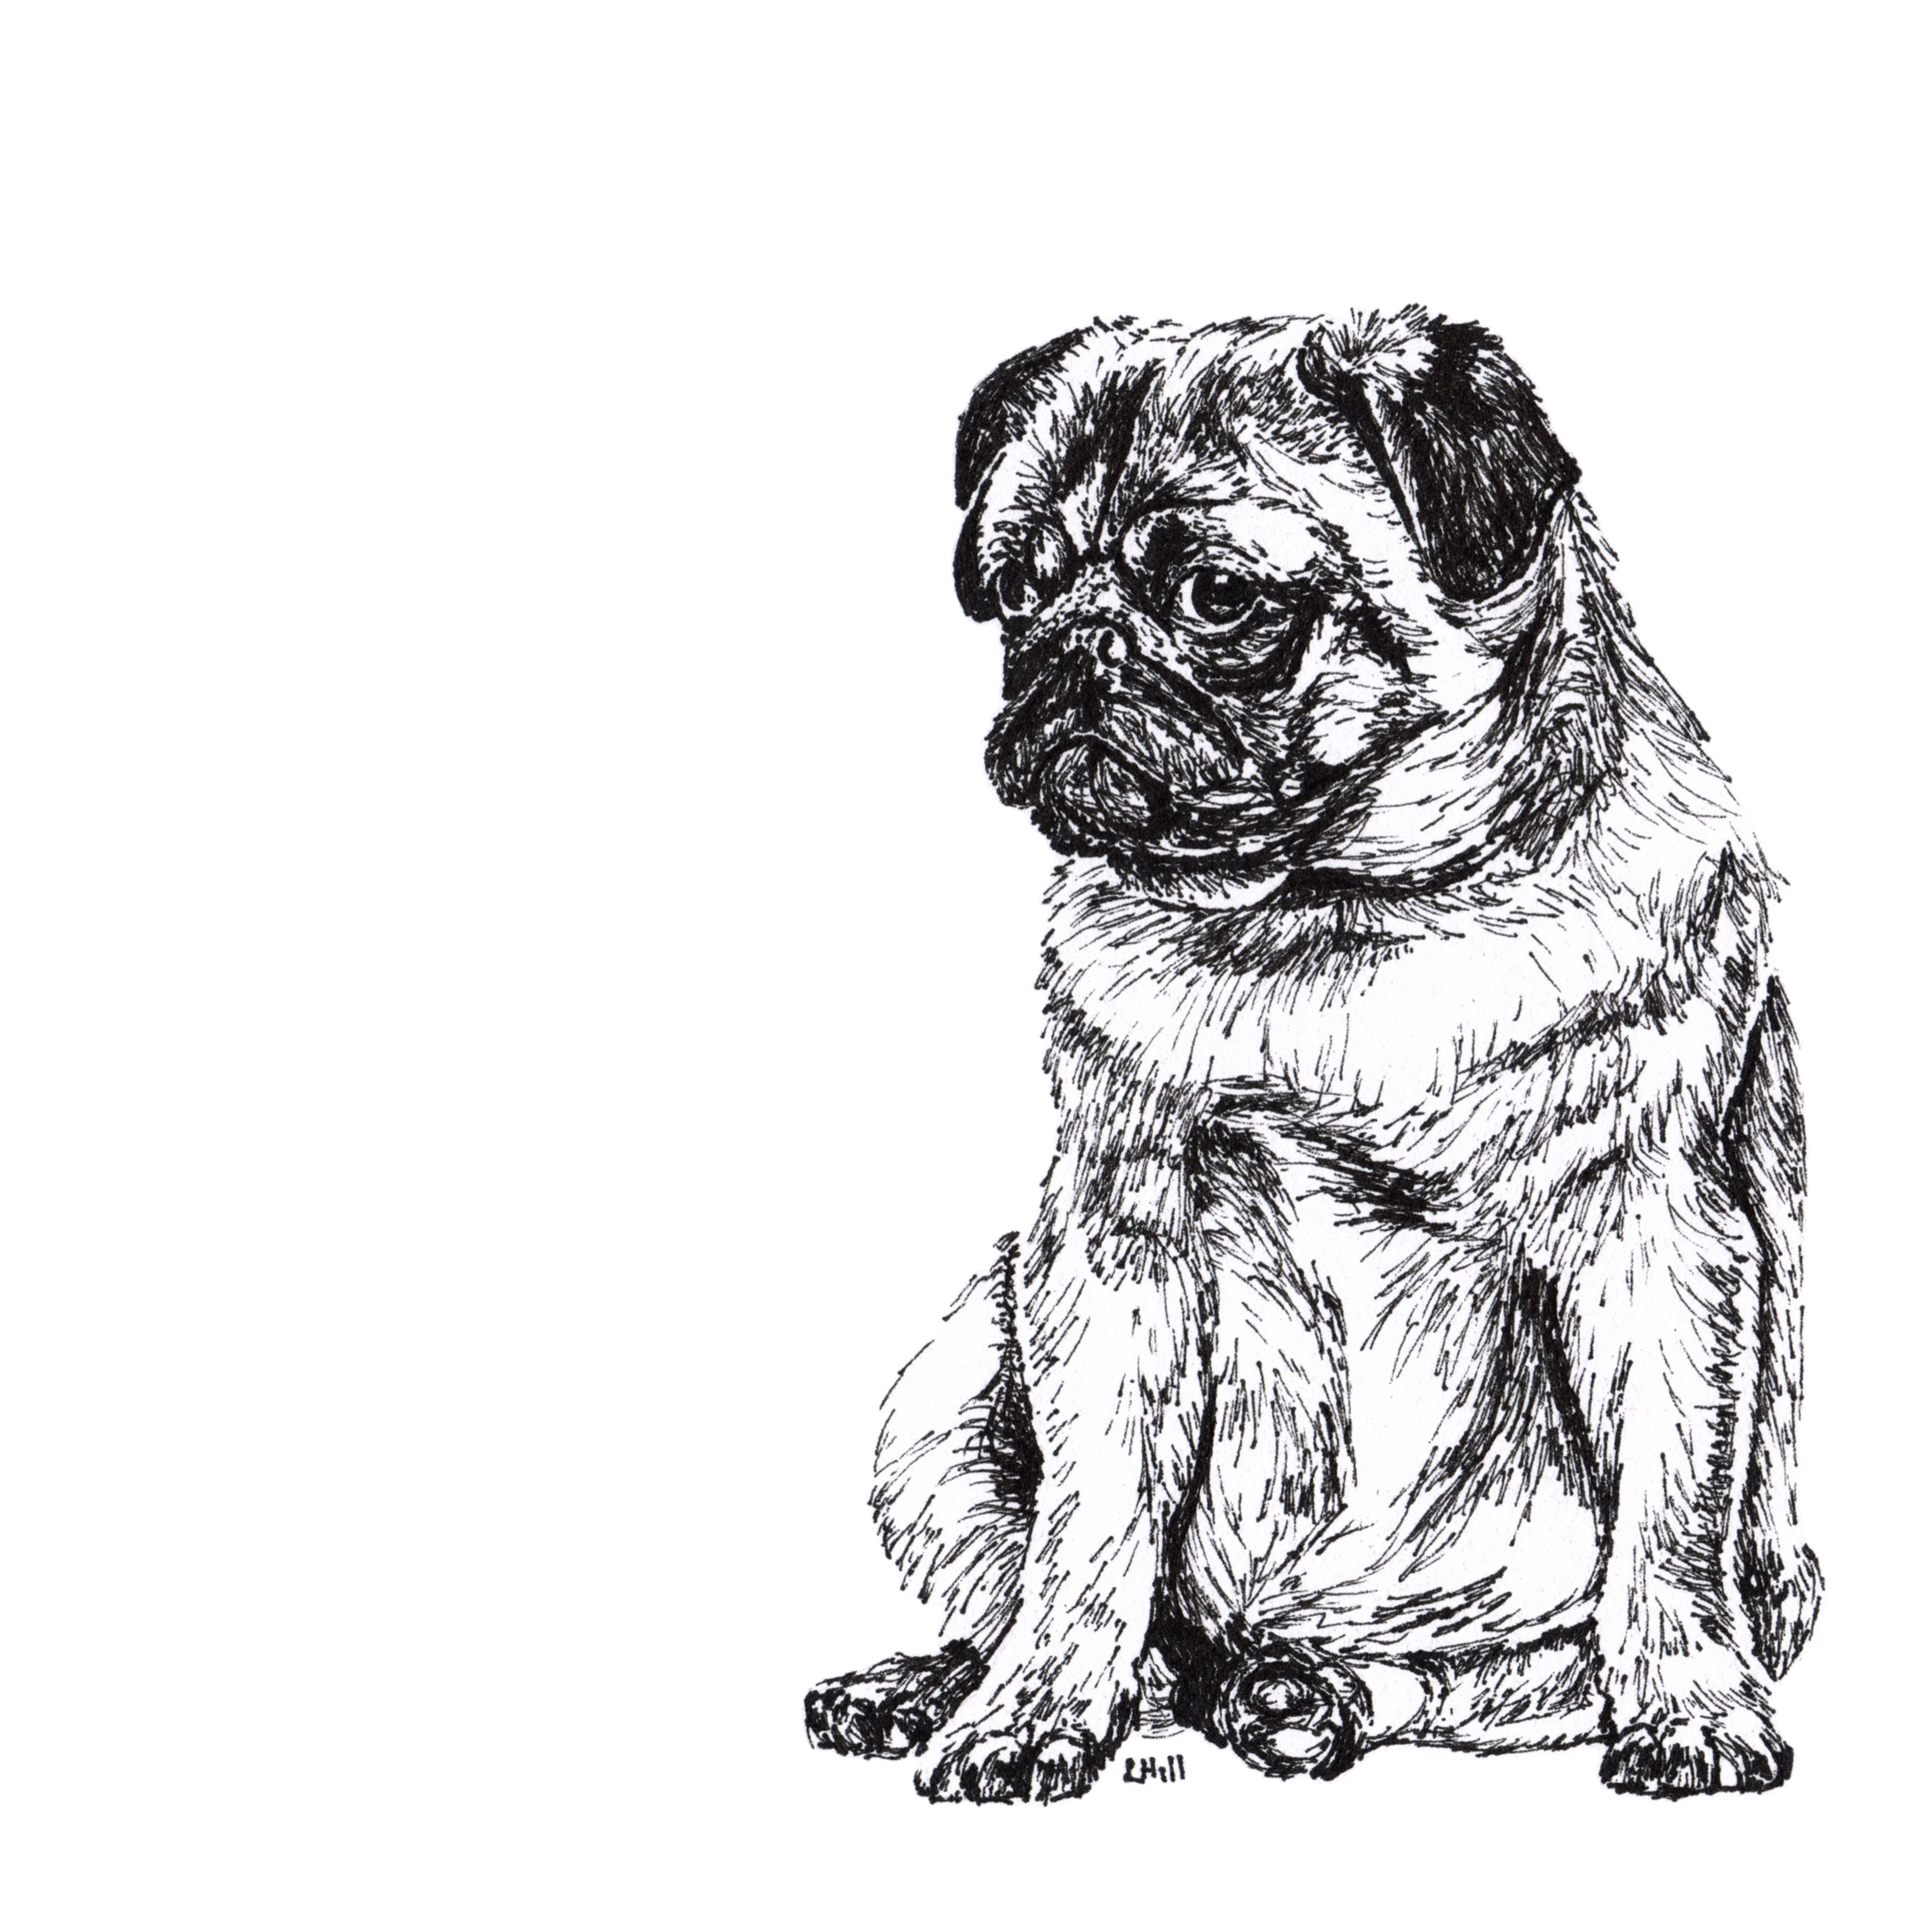 Pug pen and ink illustration by Louisa Hill